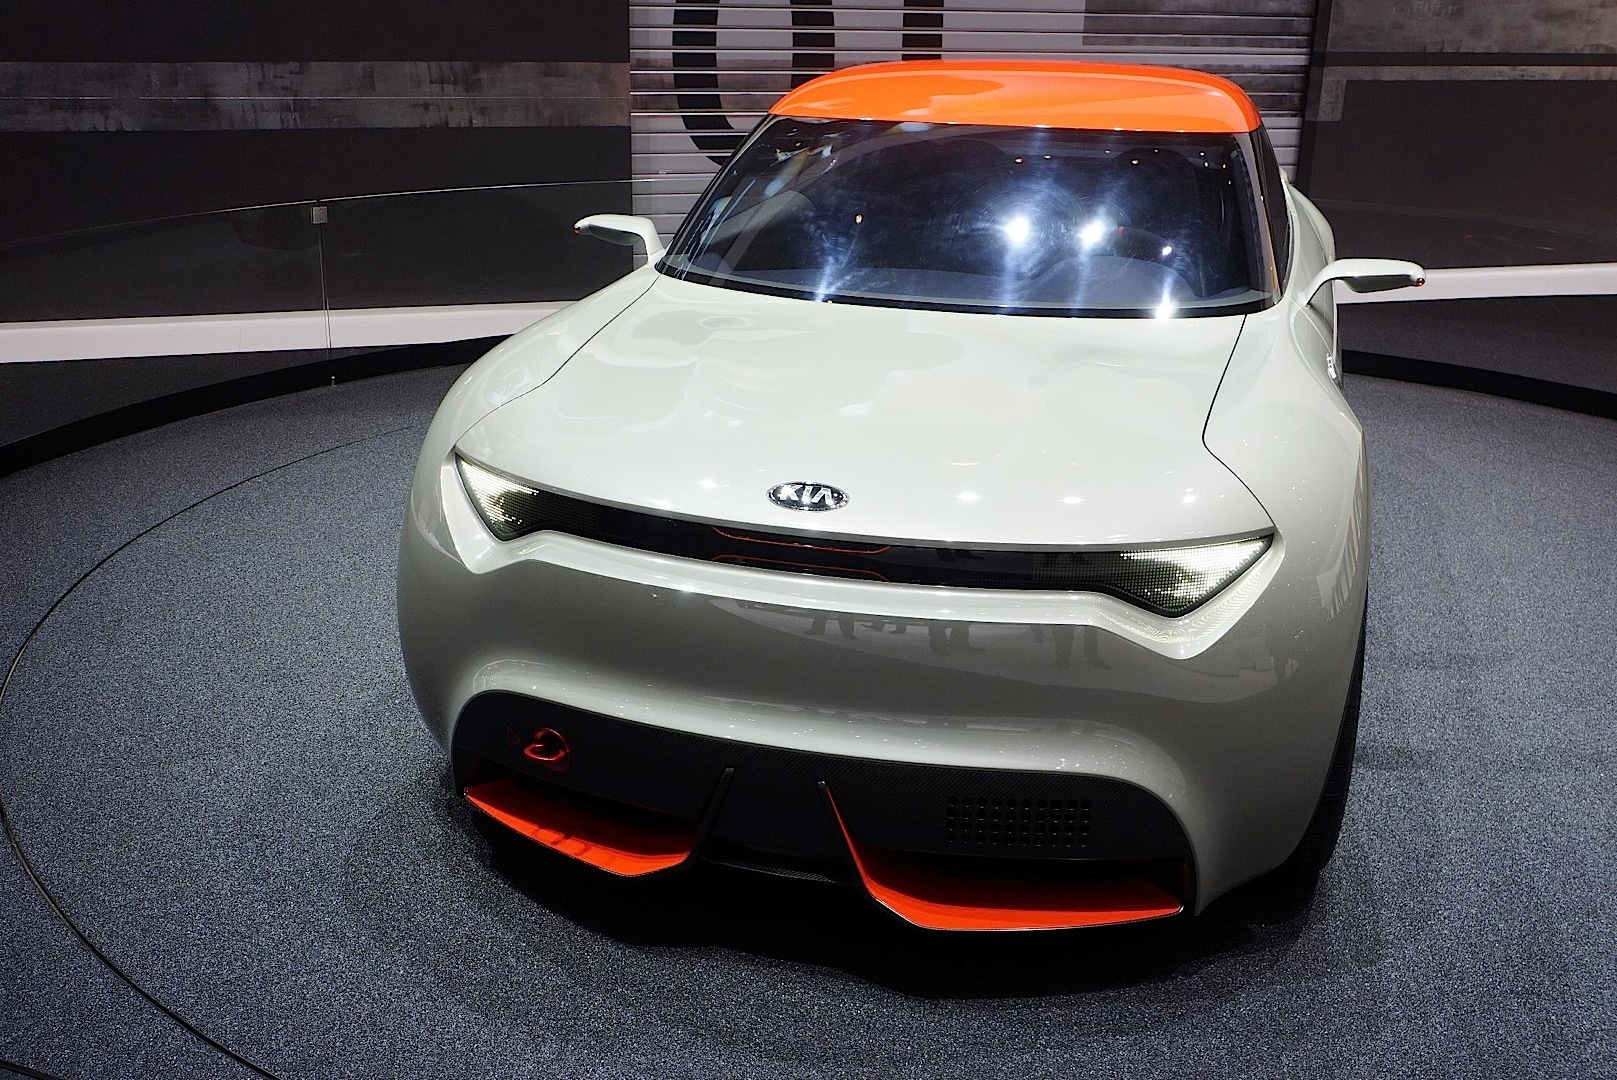 KIA: From Bankruptcy to Breakthrough